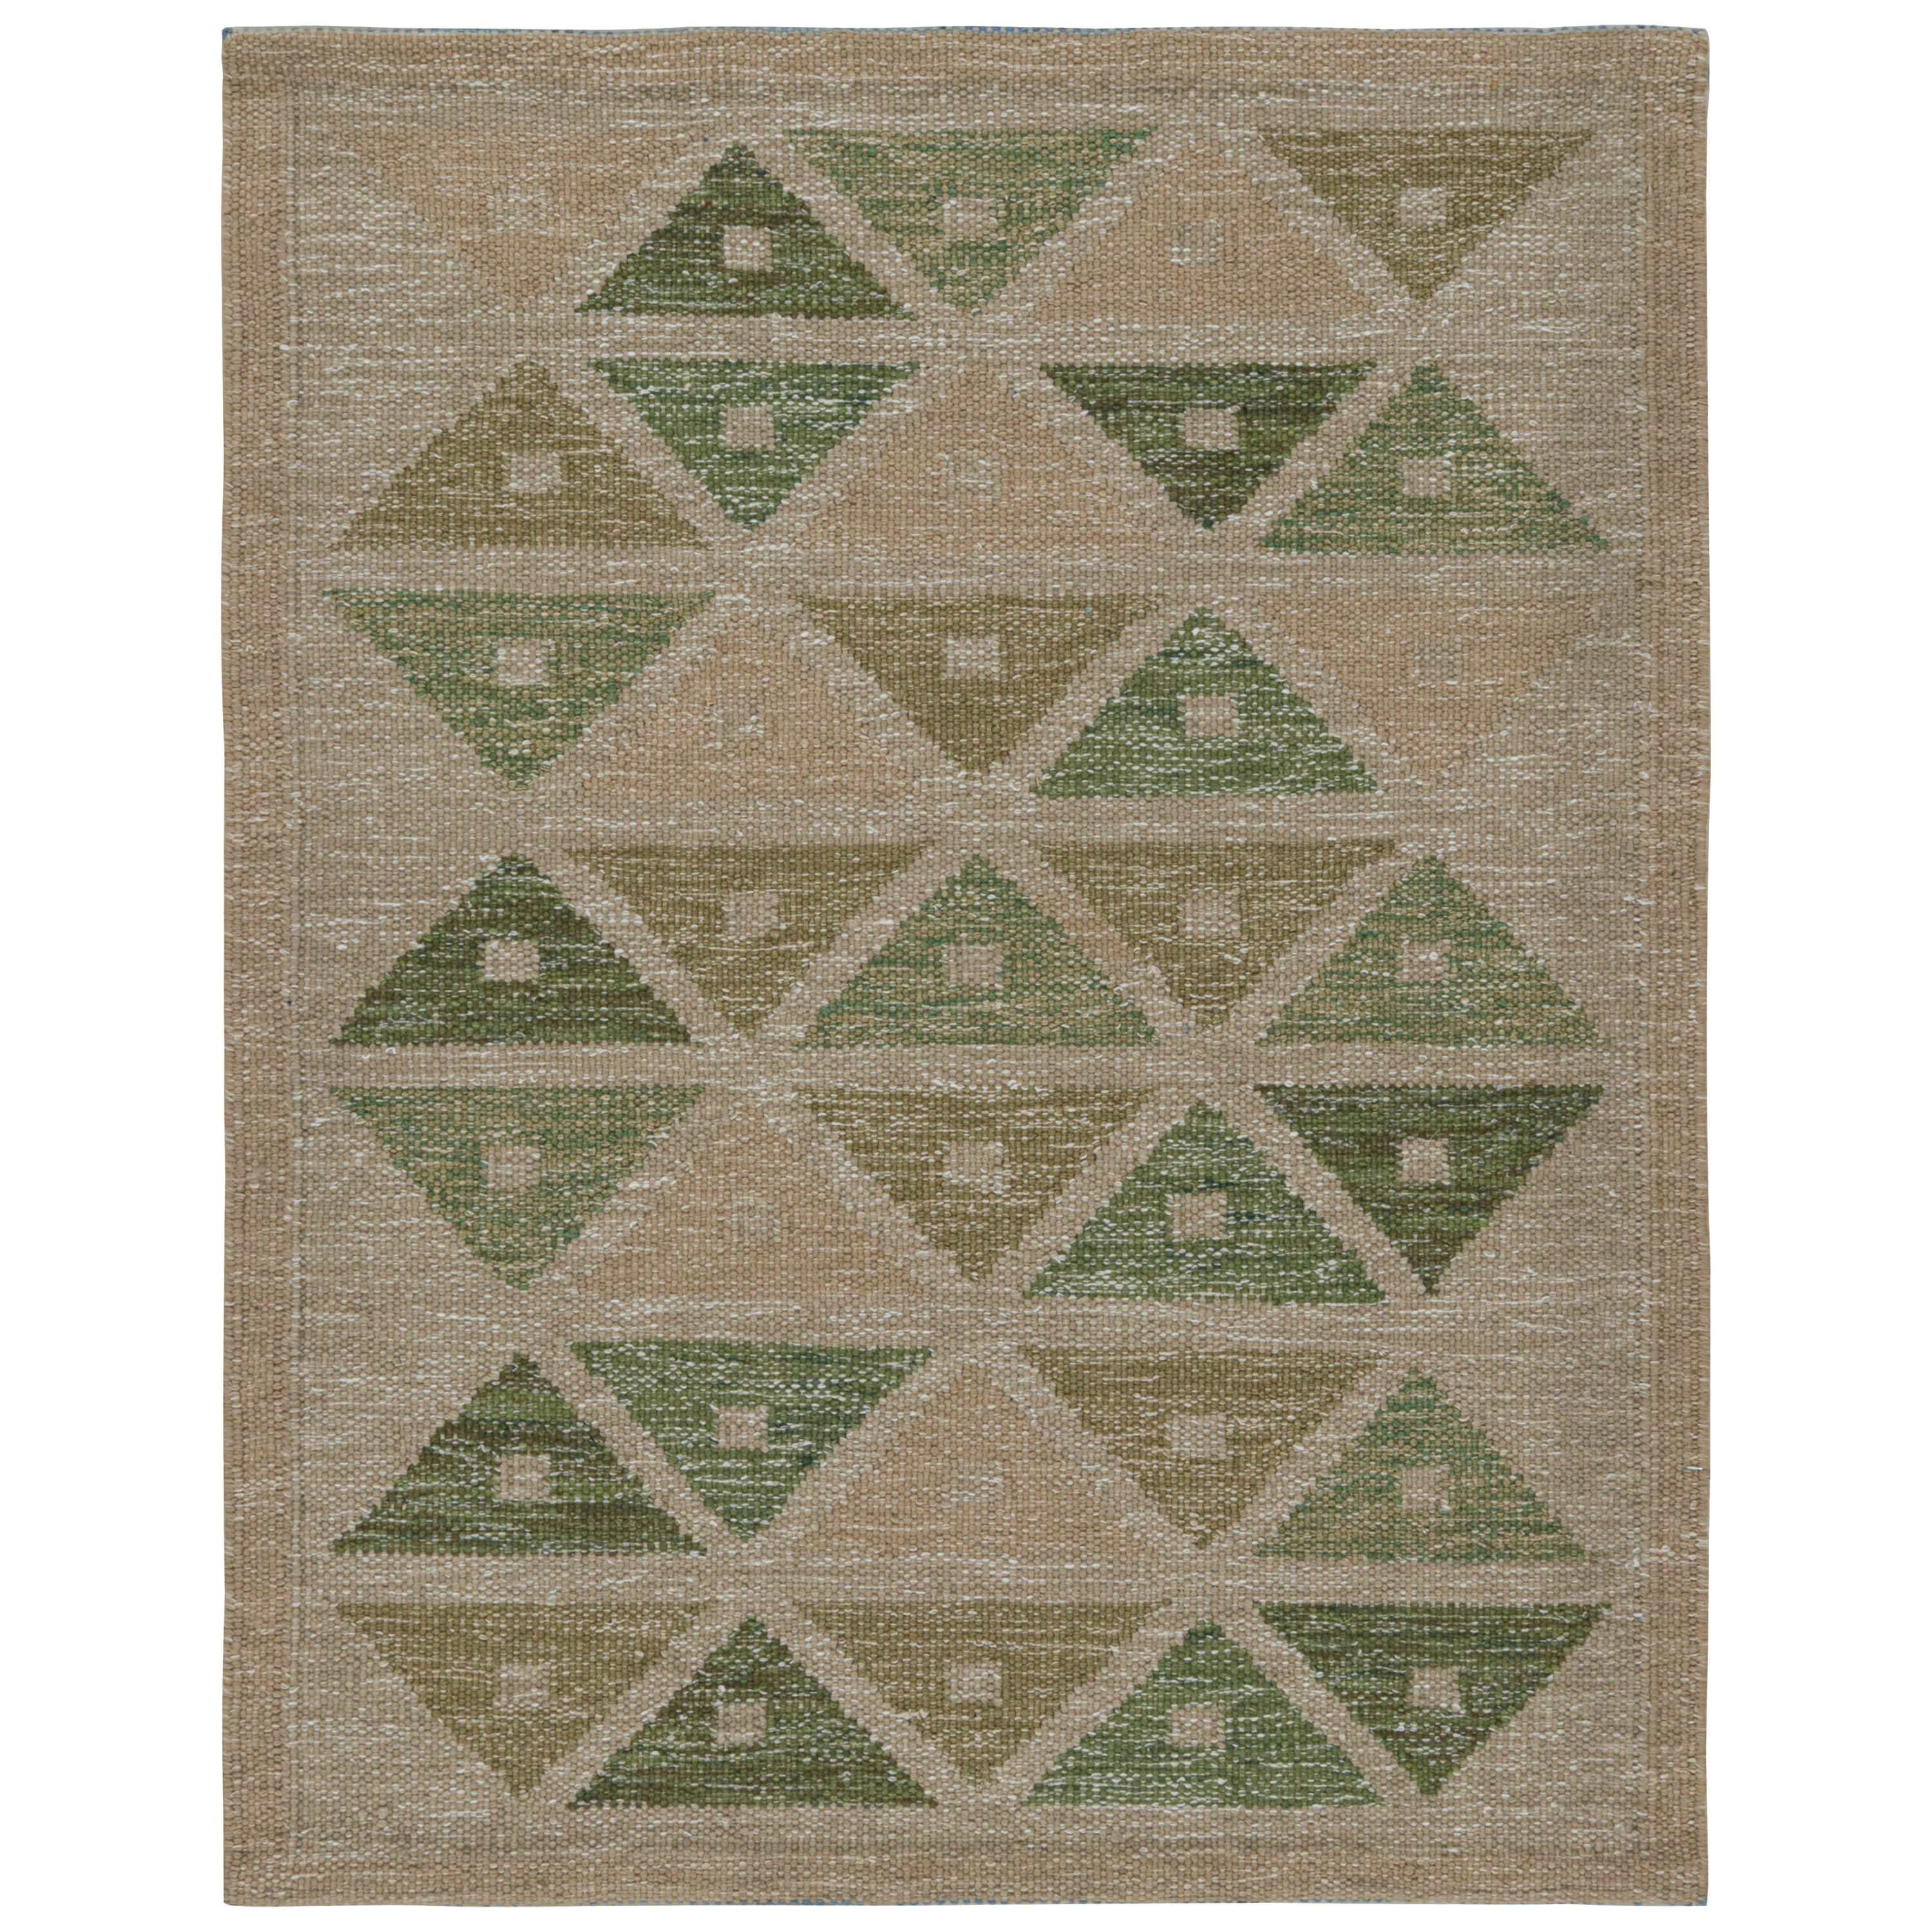 Rug & Kilim’s Scandinavian Style Kilim Rug with Brown & Green Geometric Patterns For Sale